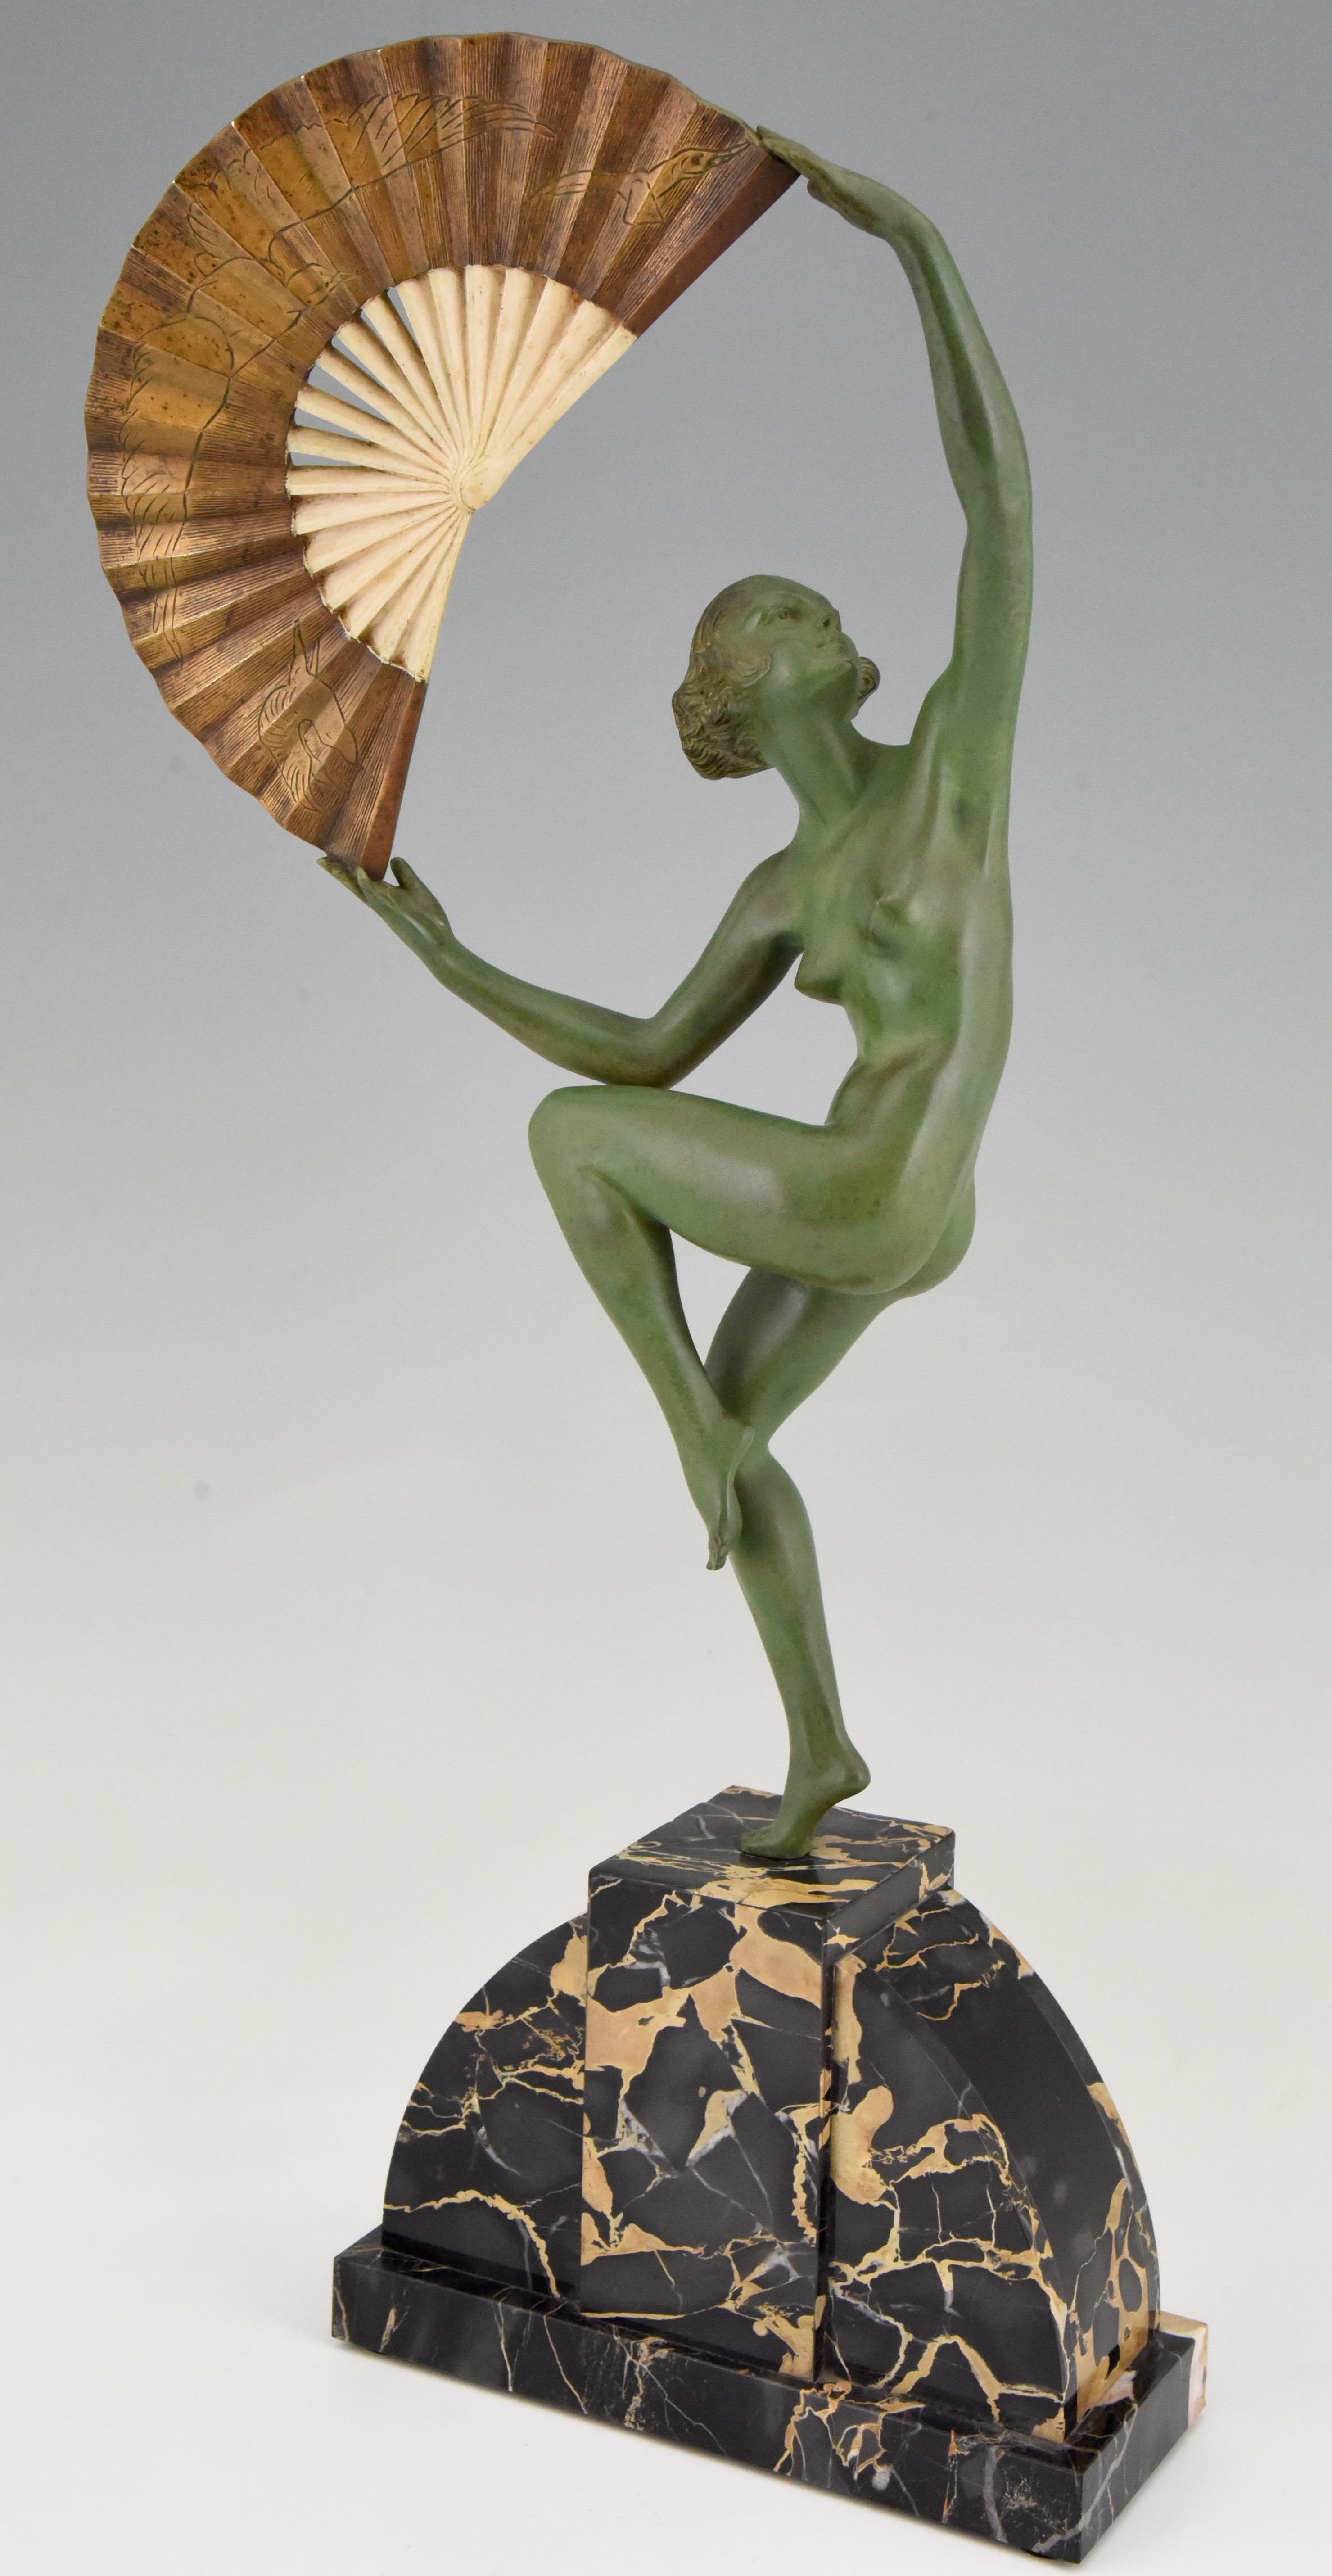 Elegant Art Deco bronze sculpture of a dancing nude standing on one foot holding a fan incised with a design of birds.
The bronze is signed by Marcel André Bouraine.
The sculpture has a lovely patina and stands on a fine Portor marble base. This